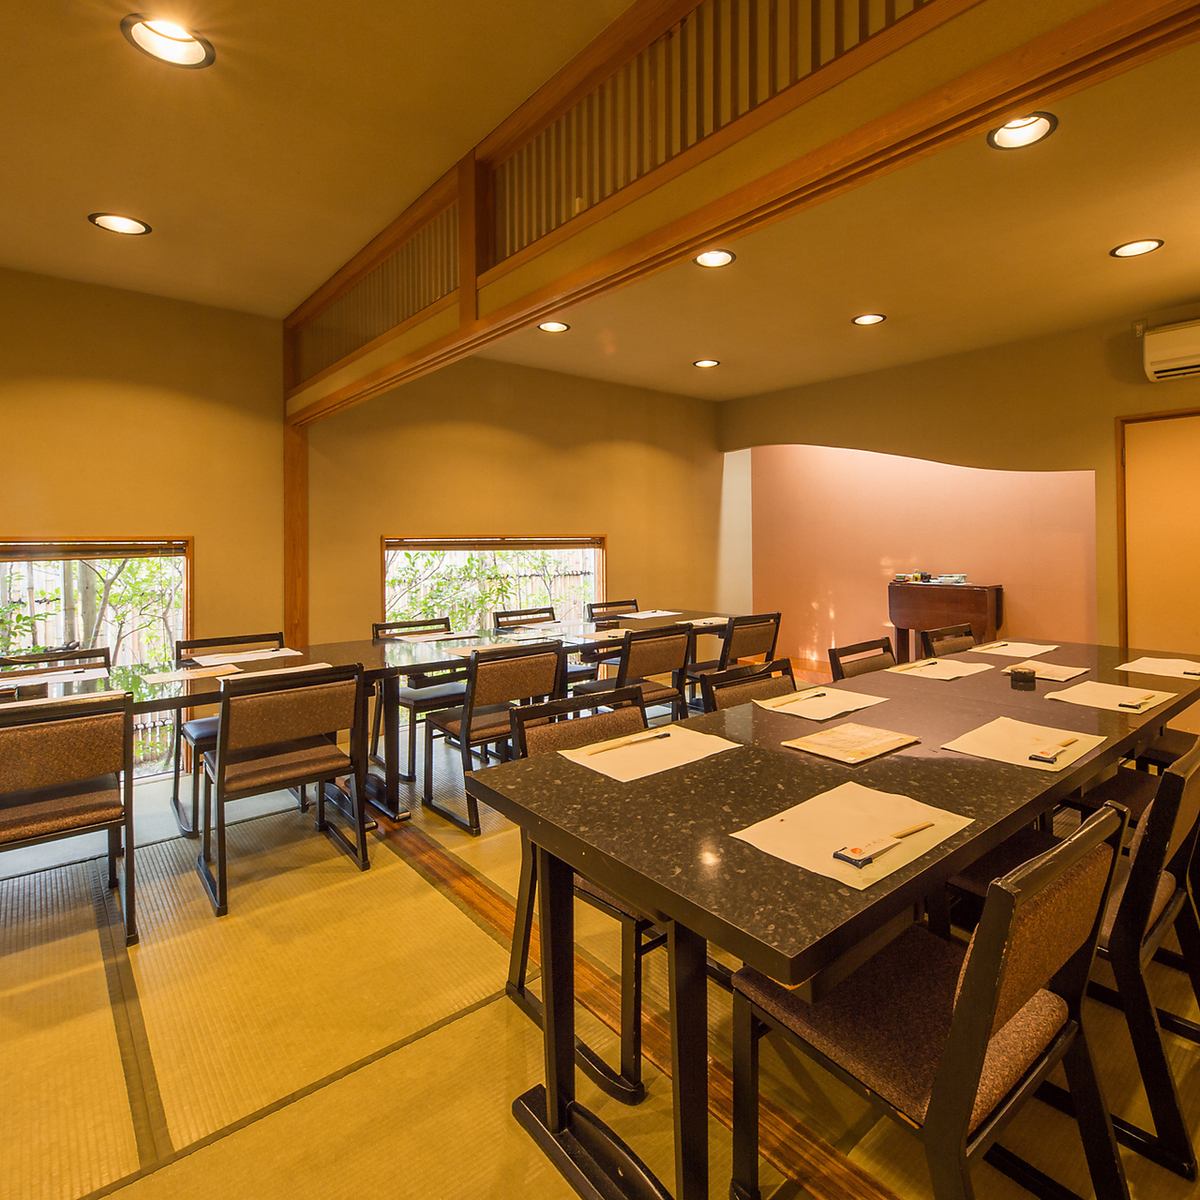 Enjoy food and drinks in a stylish Japanese-style private room